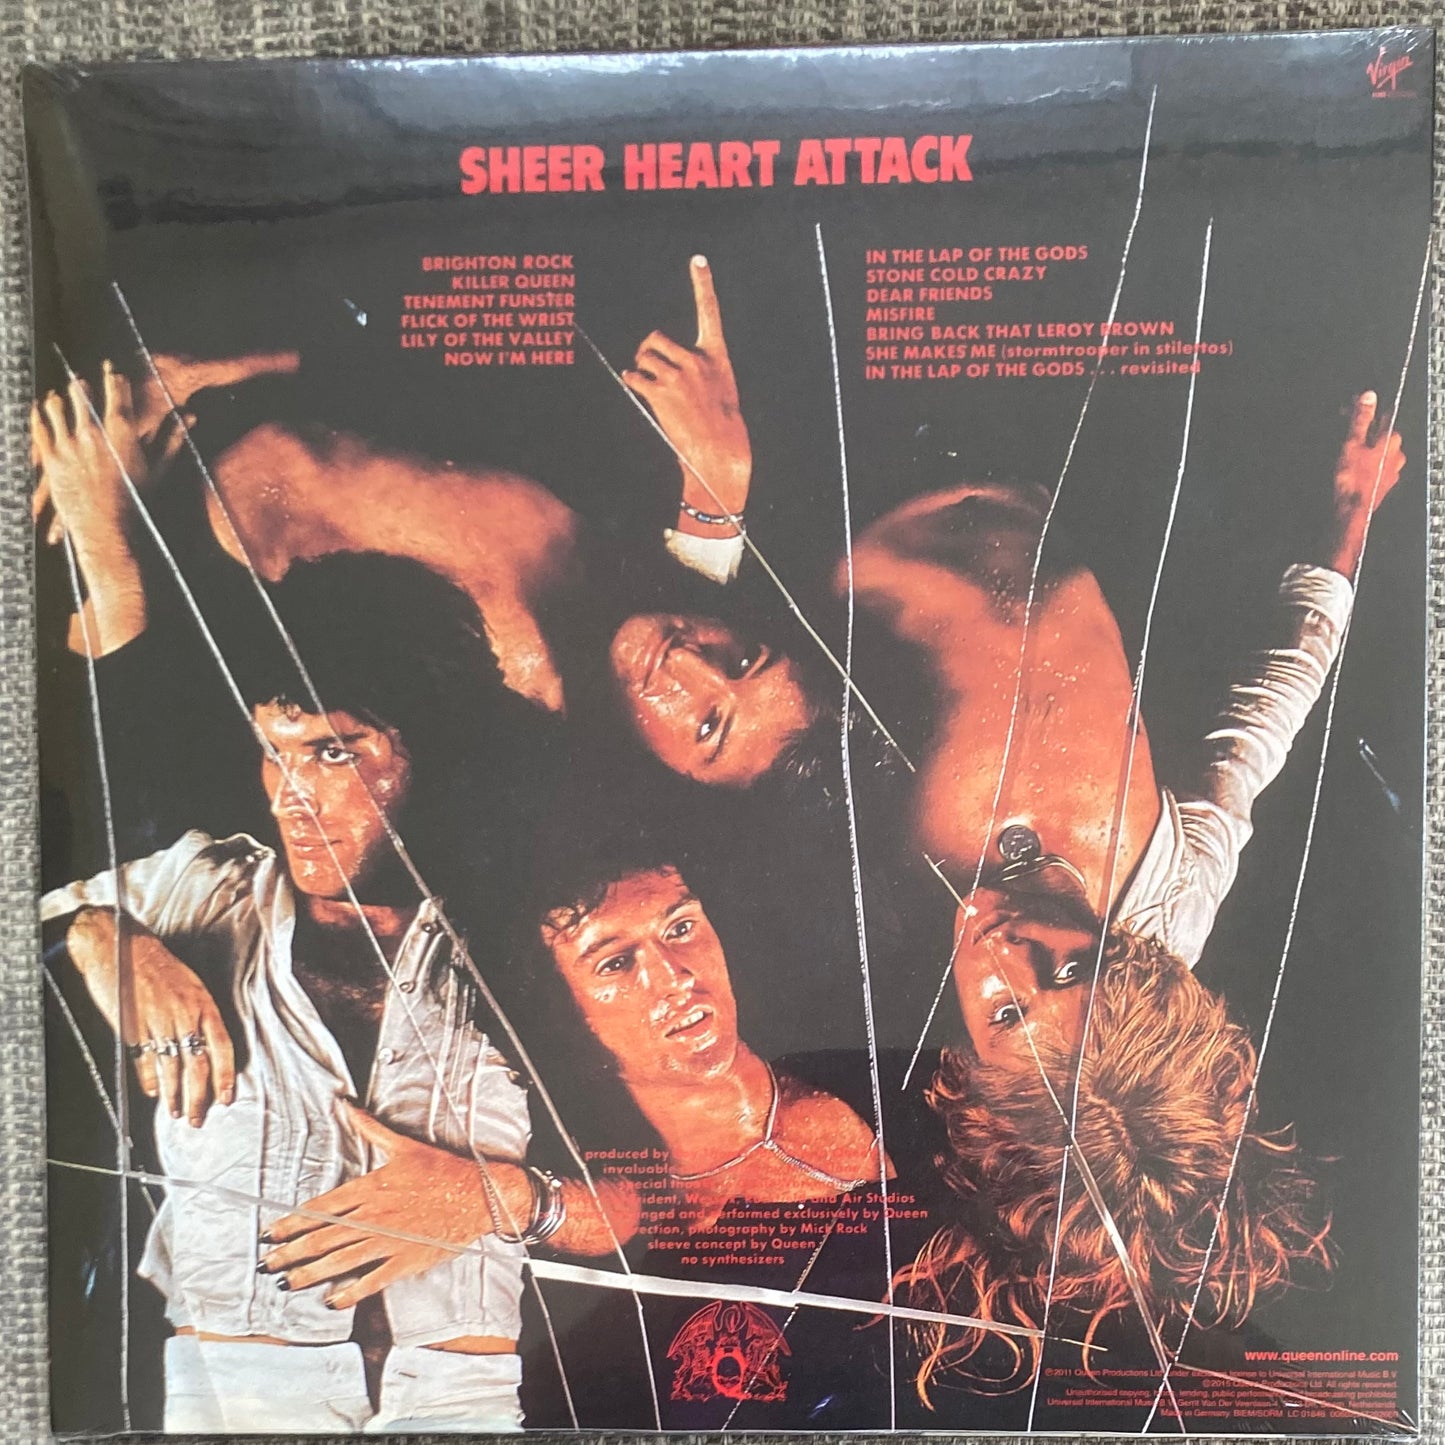 The back of 'Queen - Sheer Heart Attack' on vinyl. It is brand new and sealed.